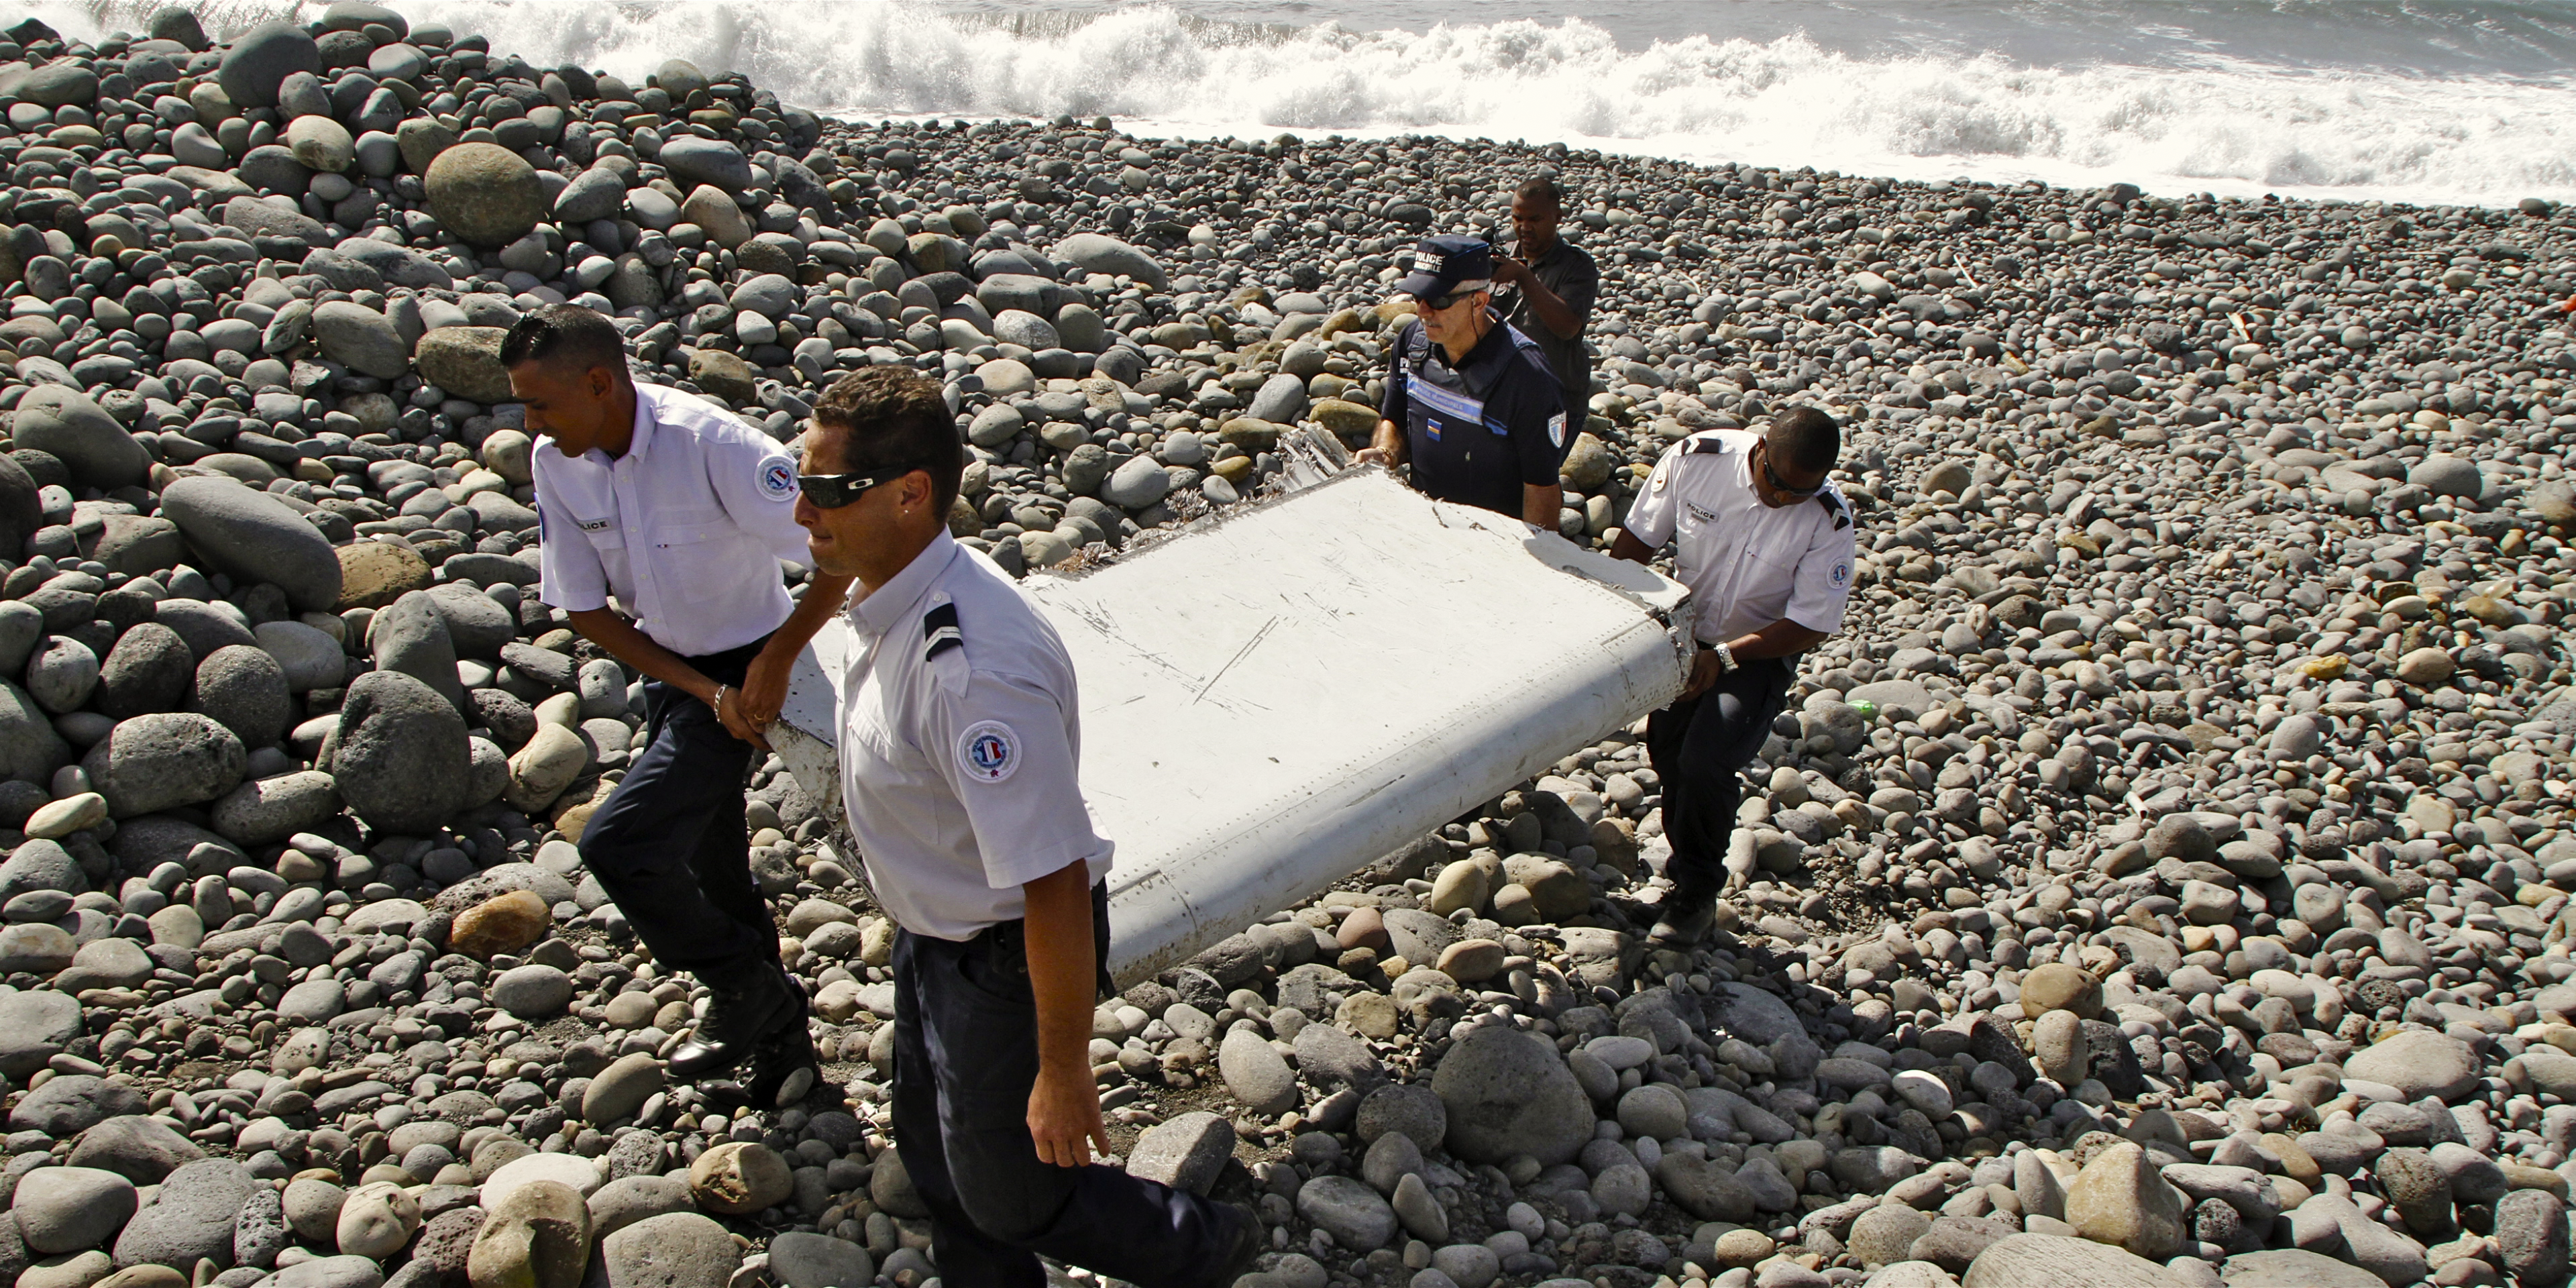 MH370: The Plane That Disappeared s1 ep3